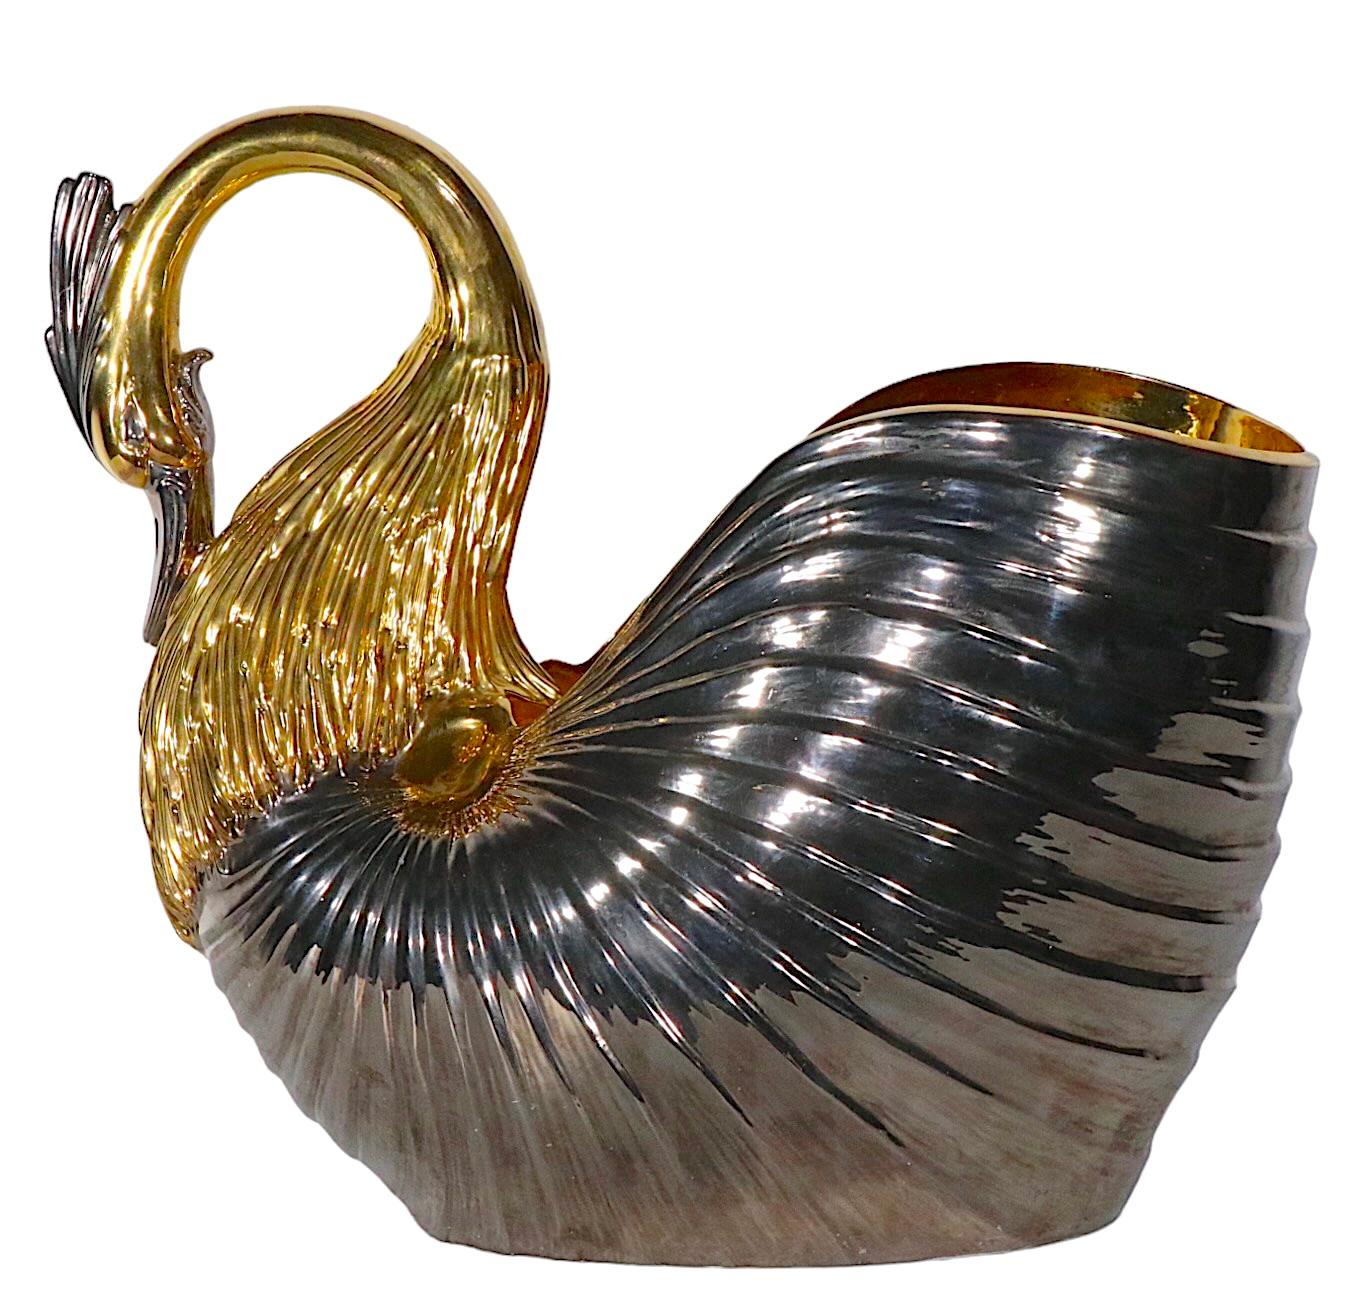 Stunning Italian Porcelain Ceramic Swan in Gold Luster and Dark Silver, c 1970s For Sale 6